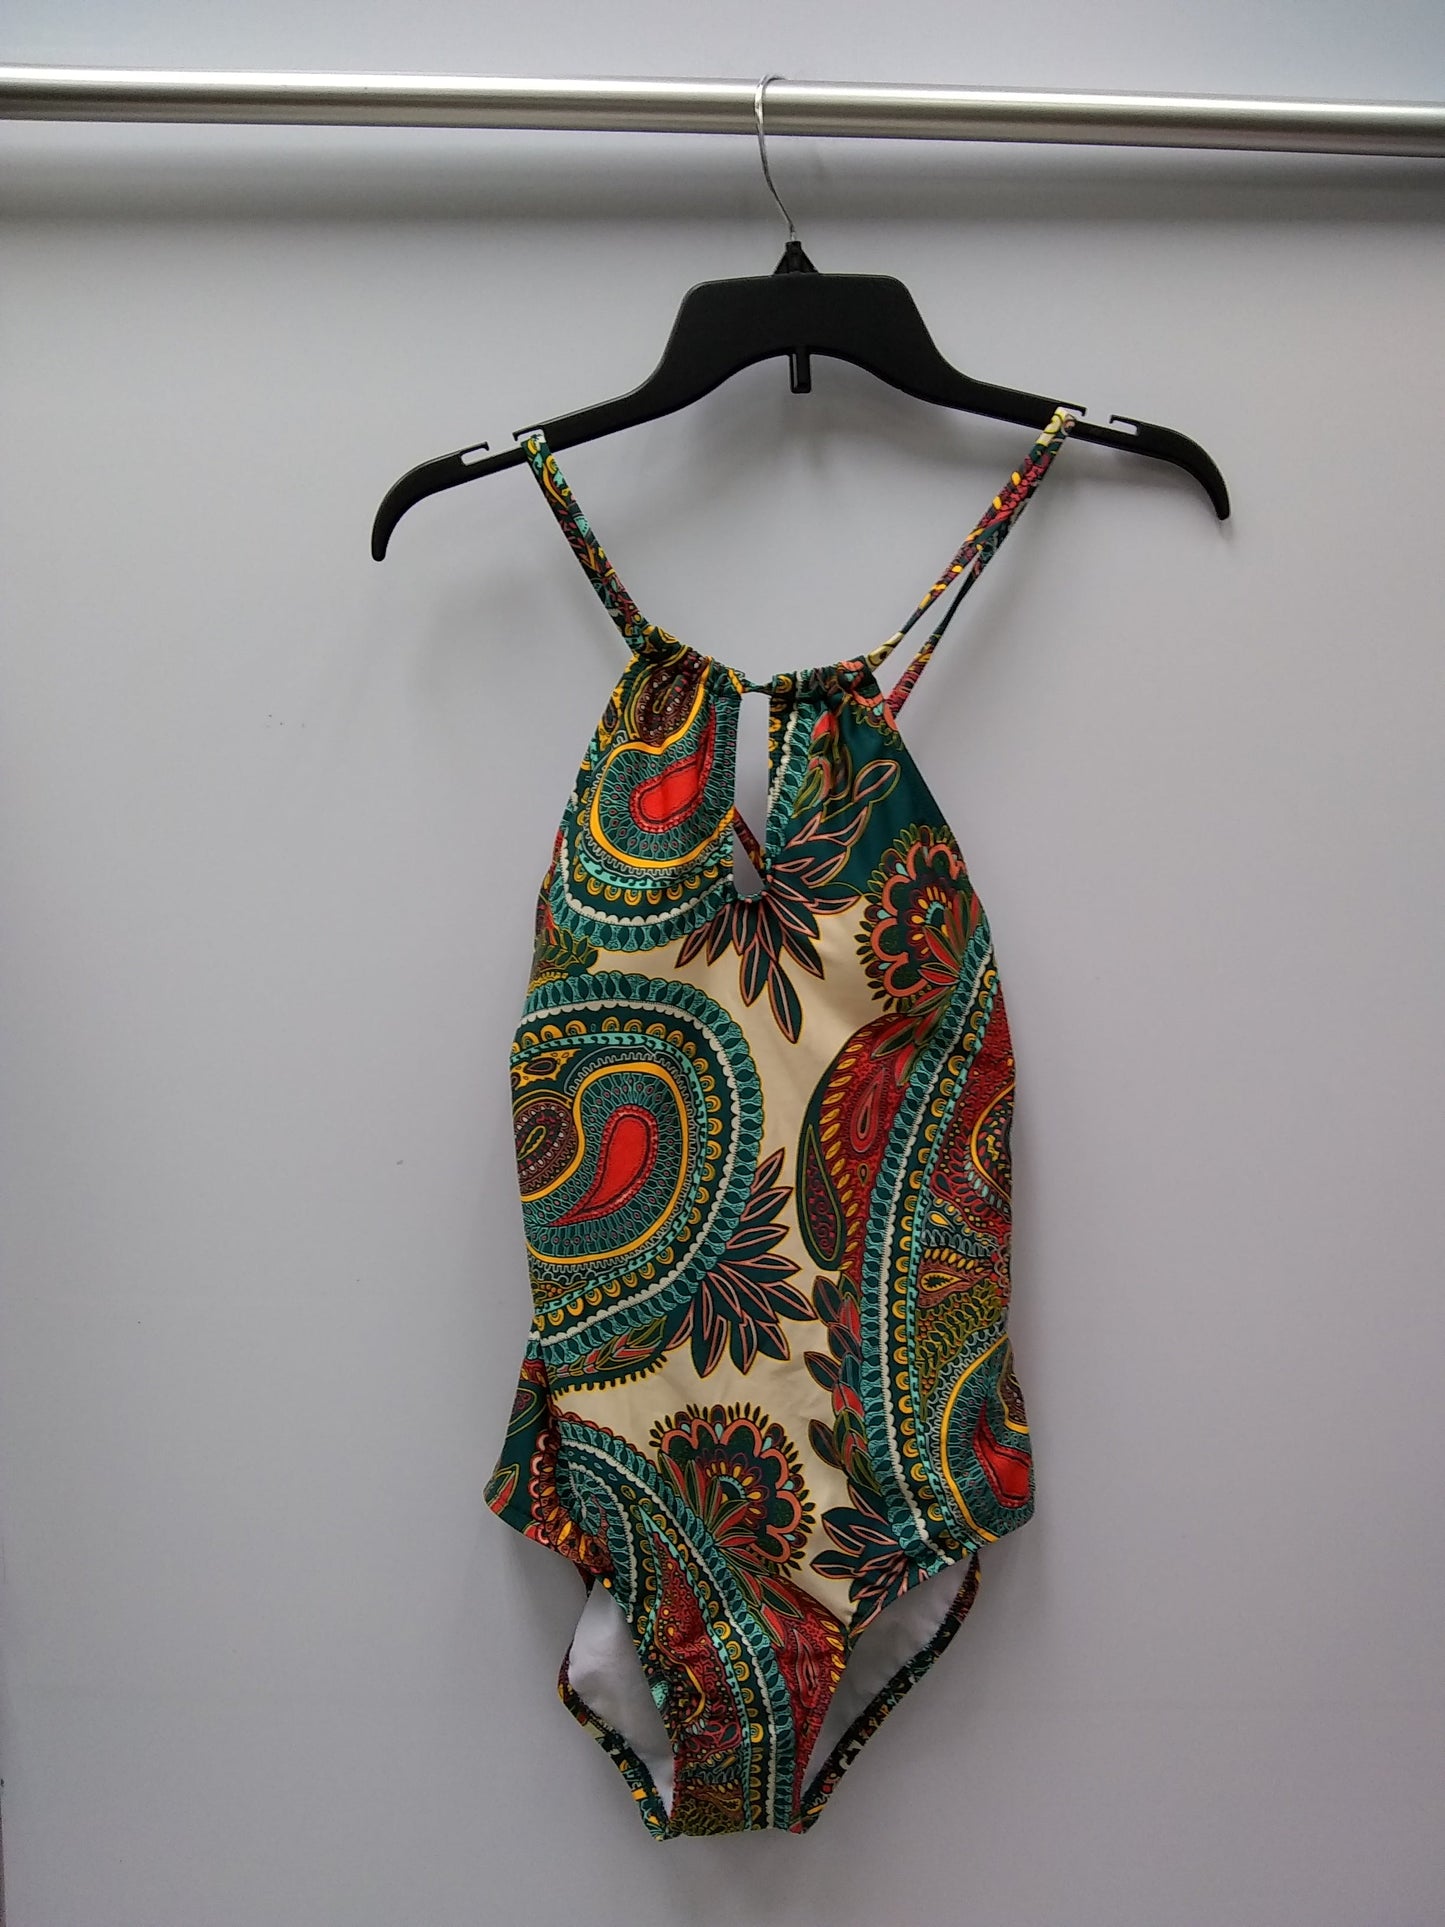 CLEANWATER CROSS BACK PAISLEY PRINT ONE PIECE SWIMSUIT MULTI S